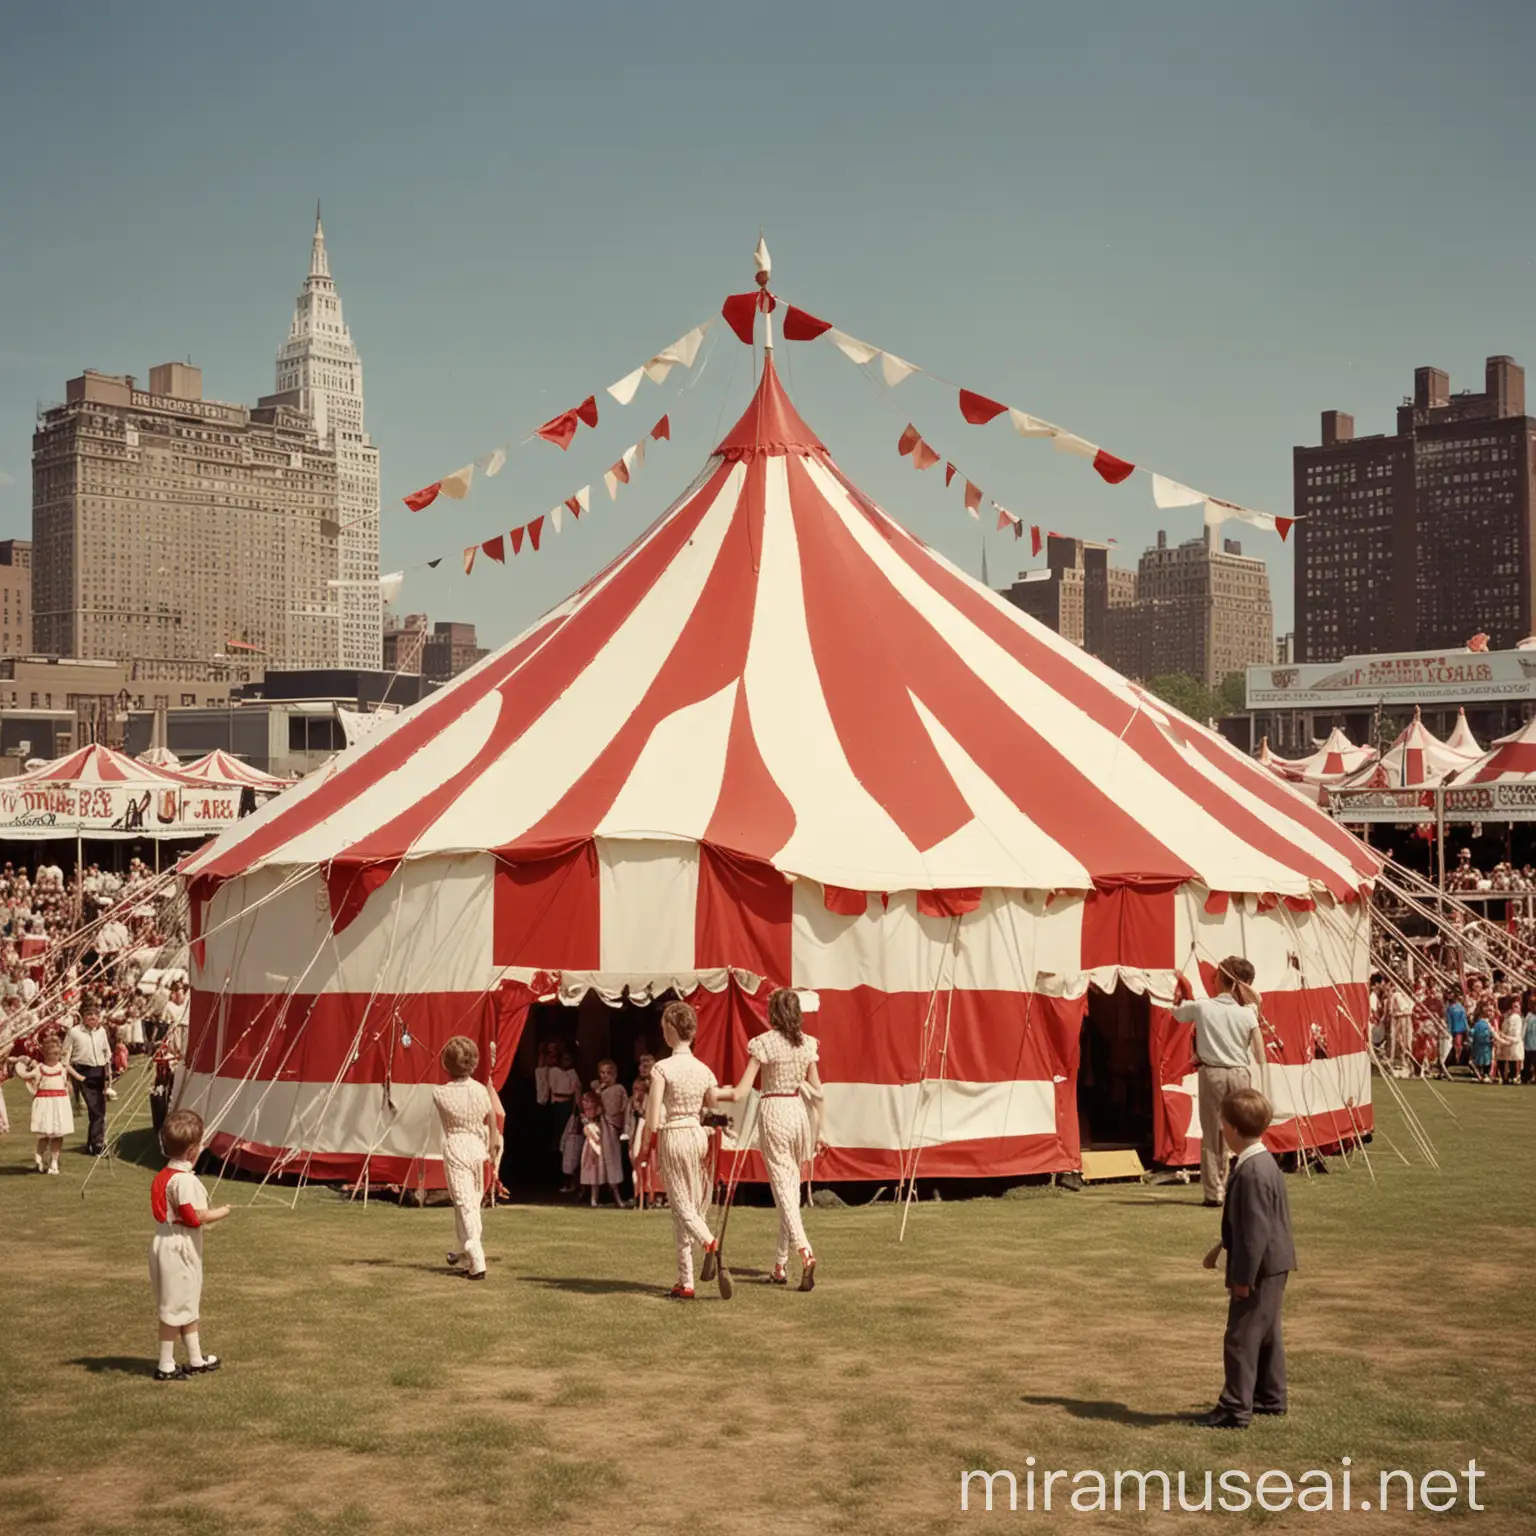 red and white circus tent, obese stilt walkers in front, children chasing each other, 1950s setting, contemporary New York in the background